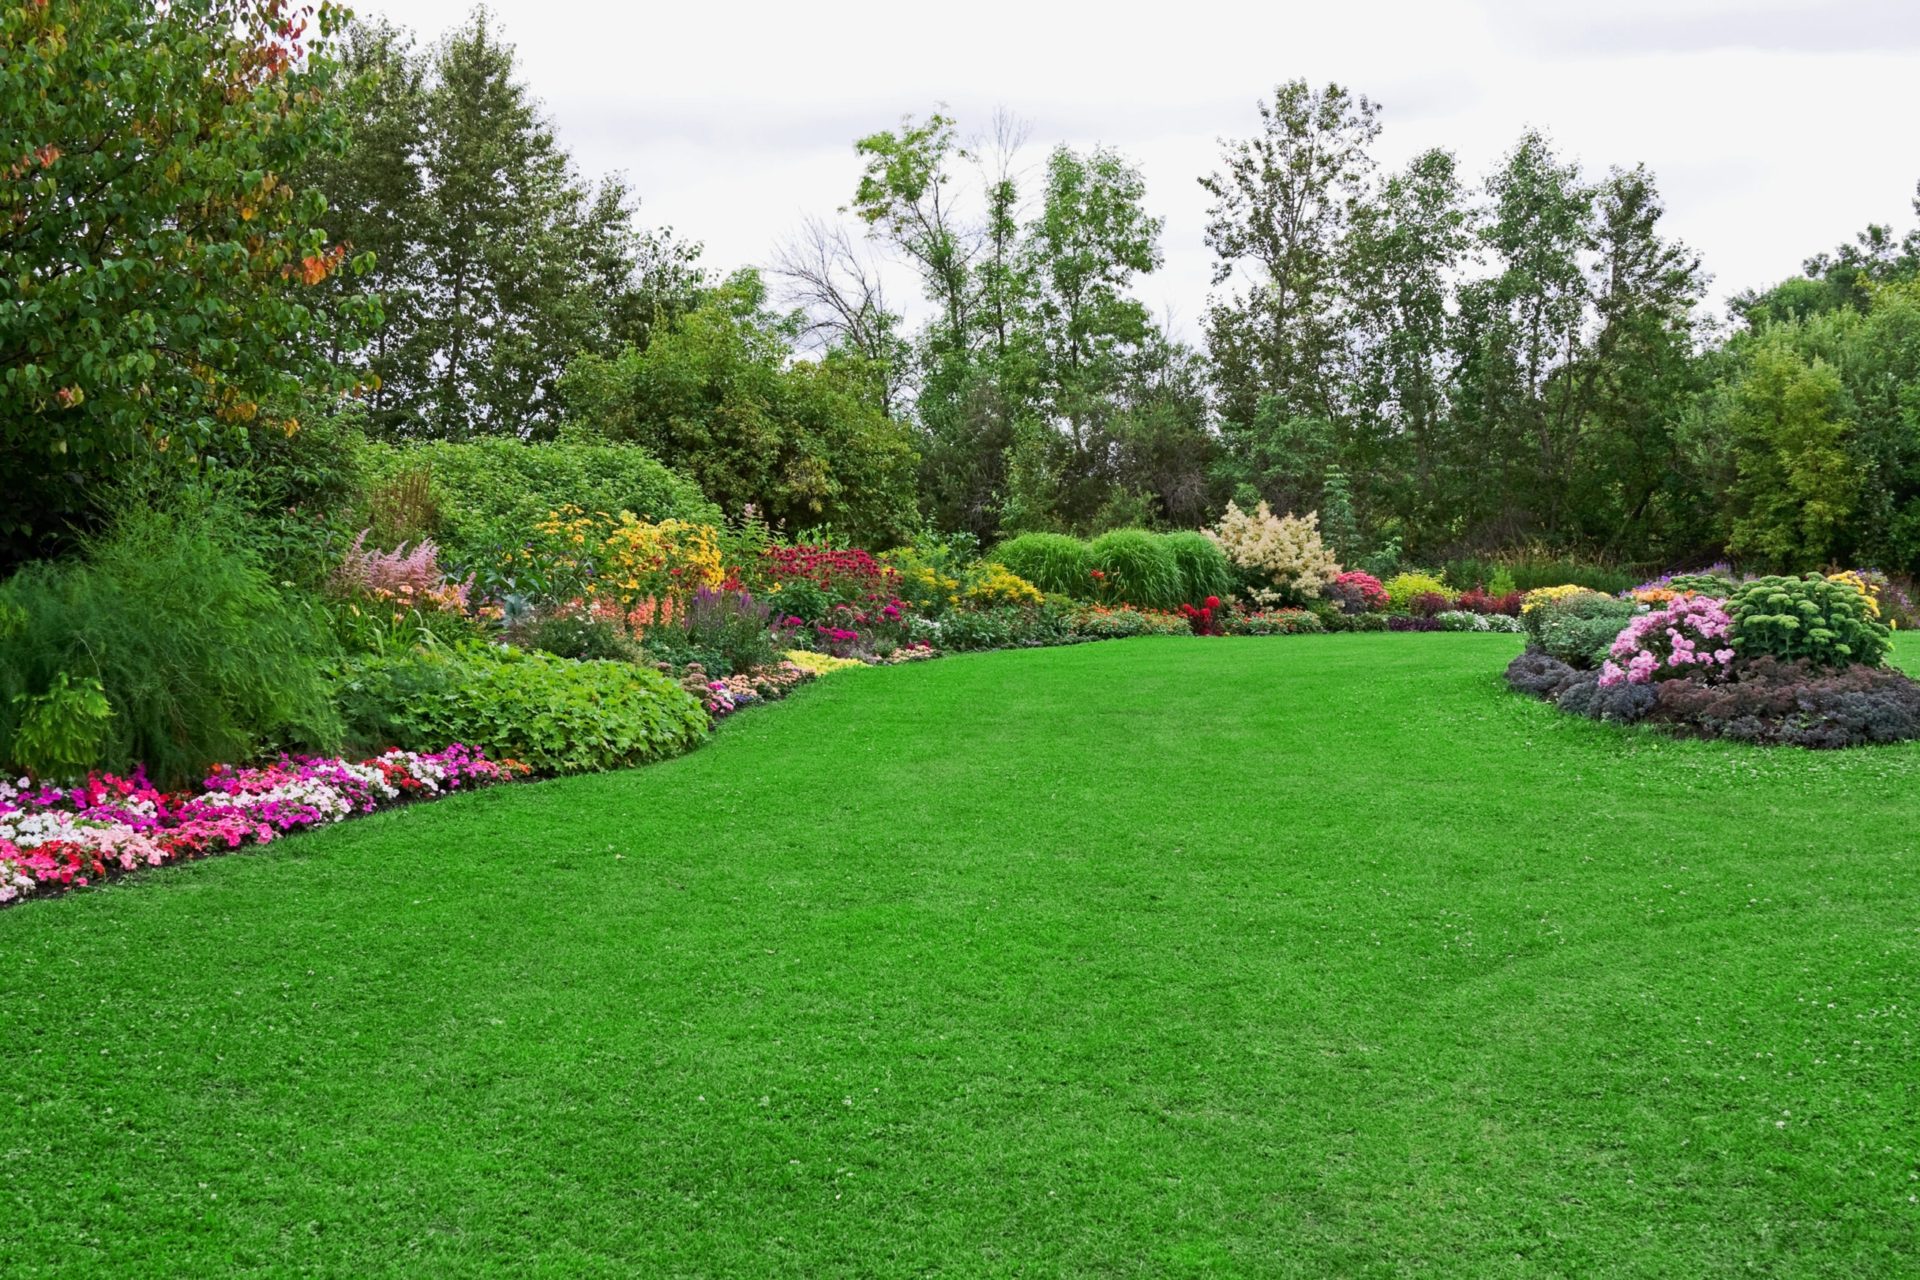 Green lawn (with a bit of clover) in a colorful landscaped formal garden.